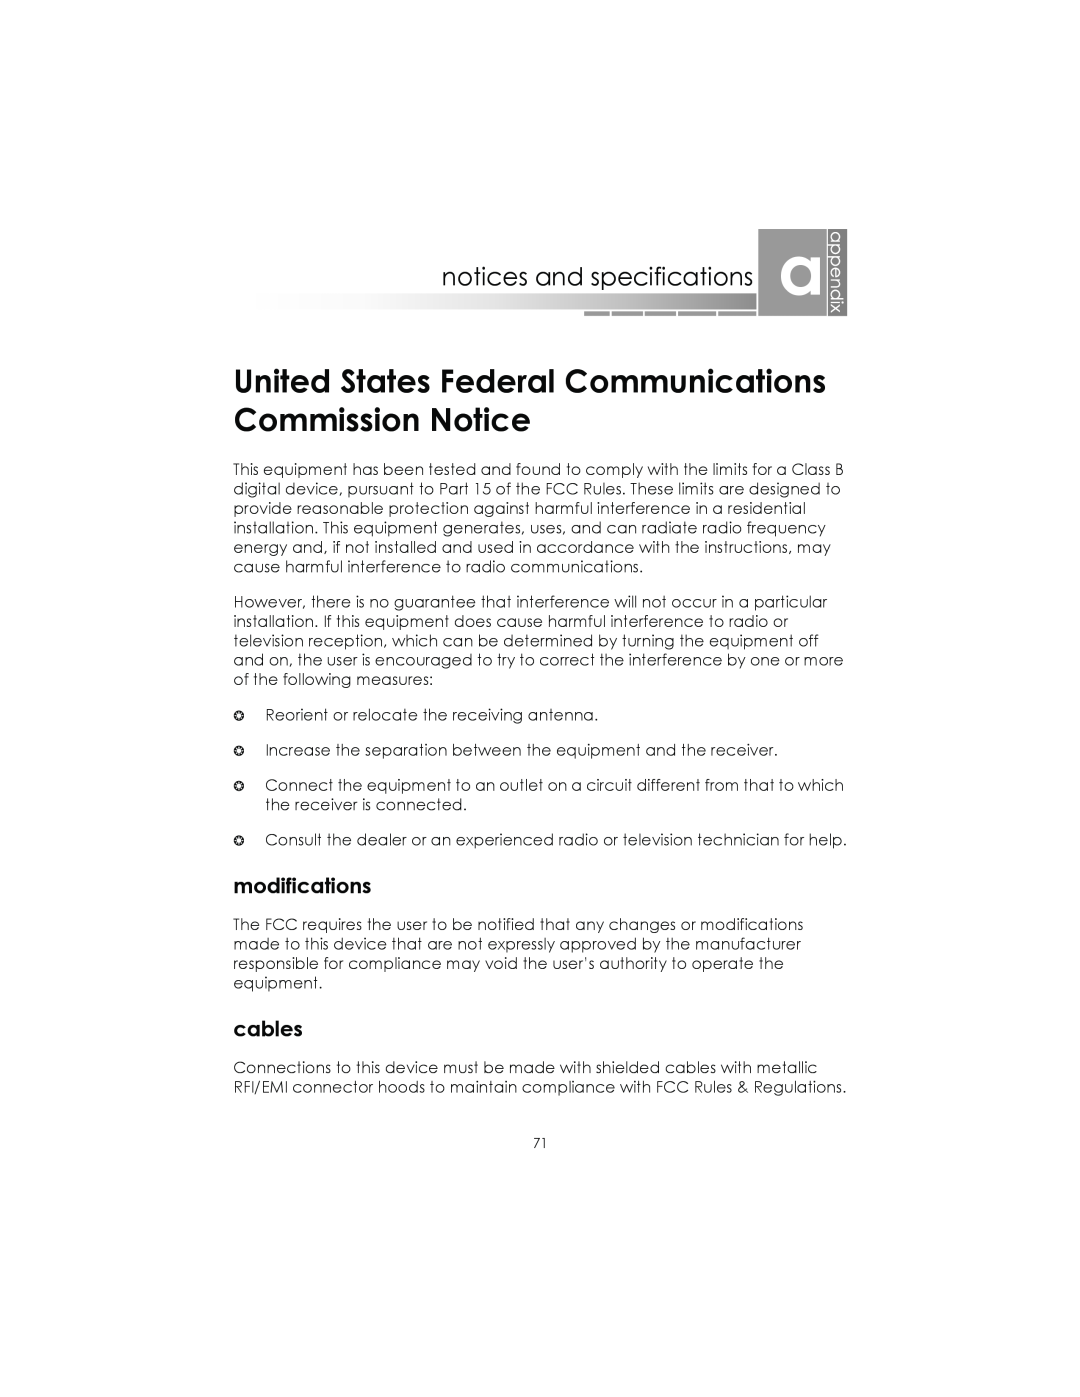 eMachines AAFW53700001K0 United States Federal Communications Commission Notice, notices and specifications a, cables 